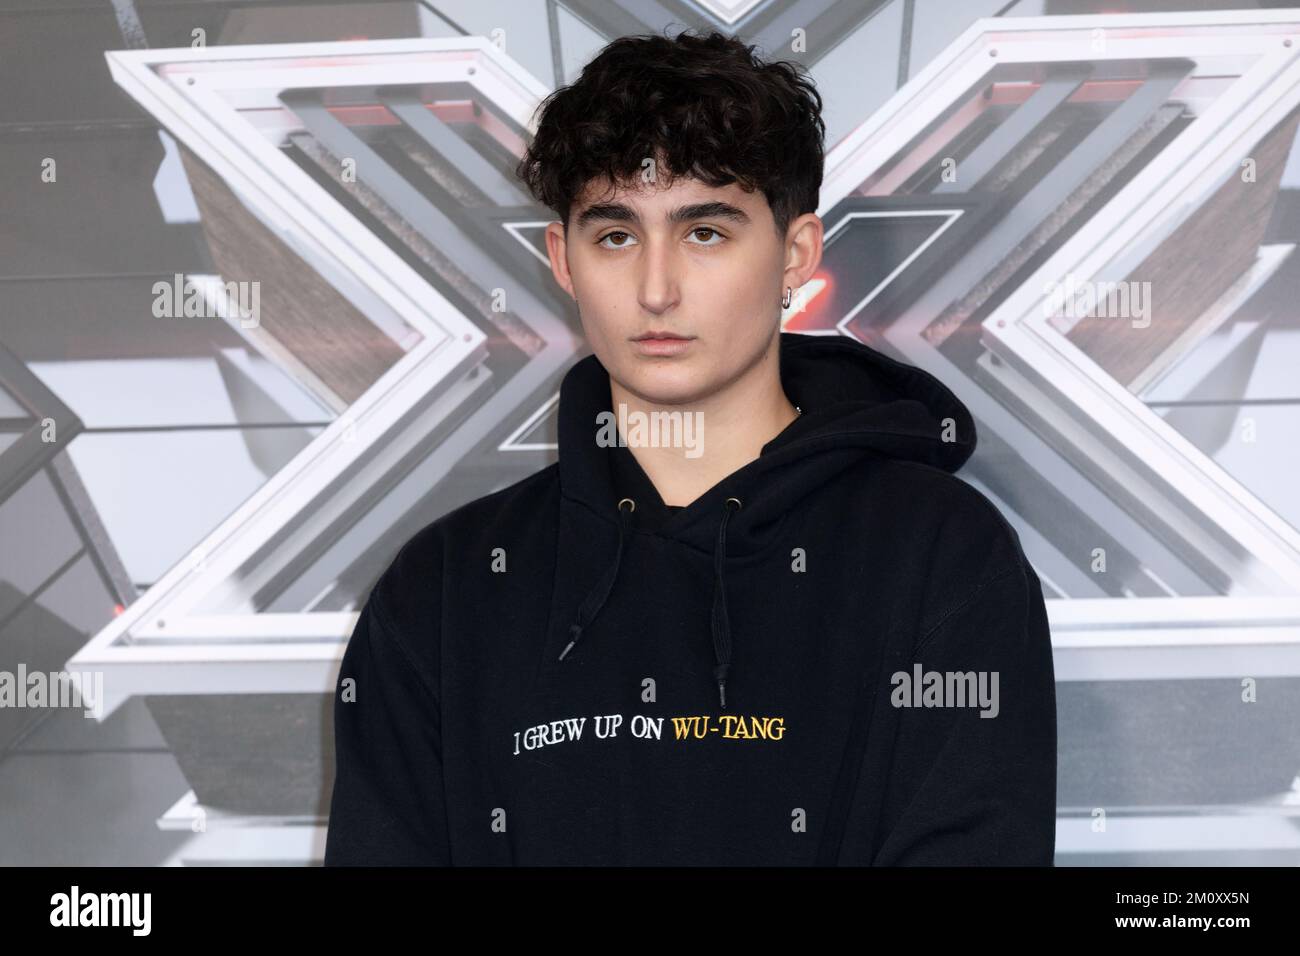 MILAN, ITALY - Dec 6, 2022 : Linda Riverditi attends the press conference of X Factor Italy Final 2022 at Forum Assago in Milan, Italy. Stock Photo